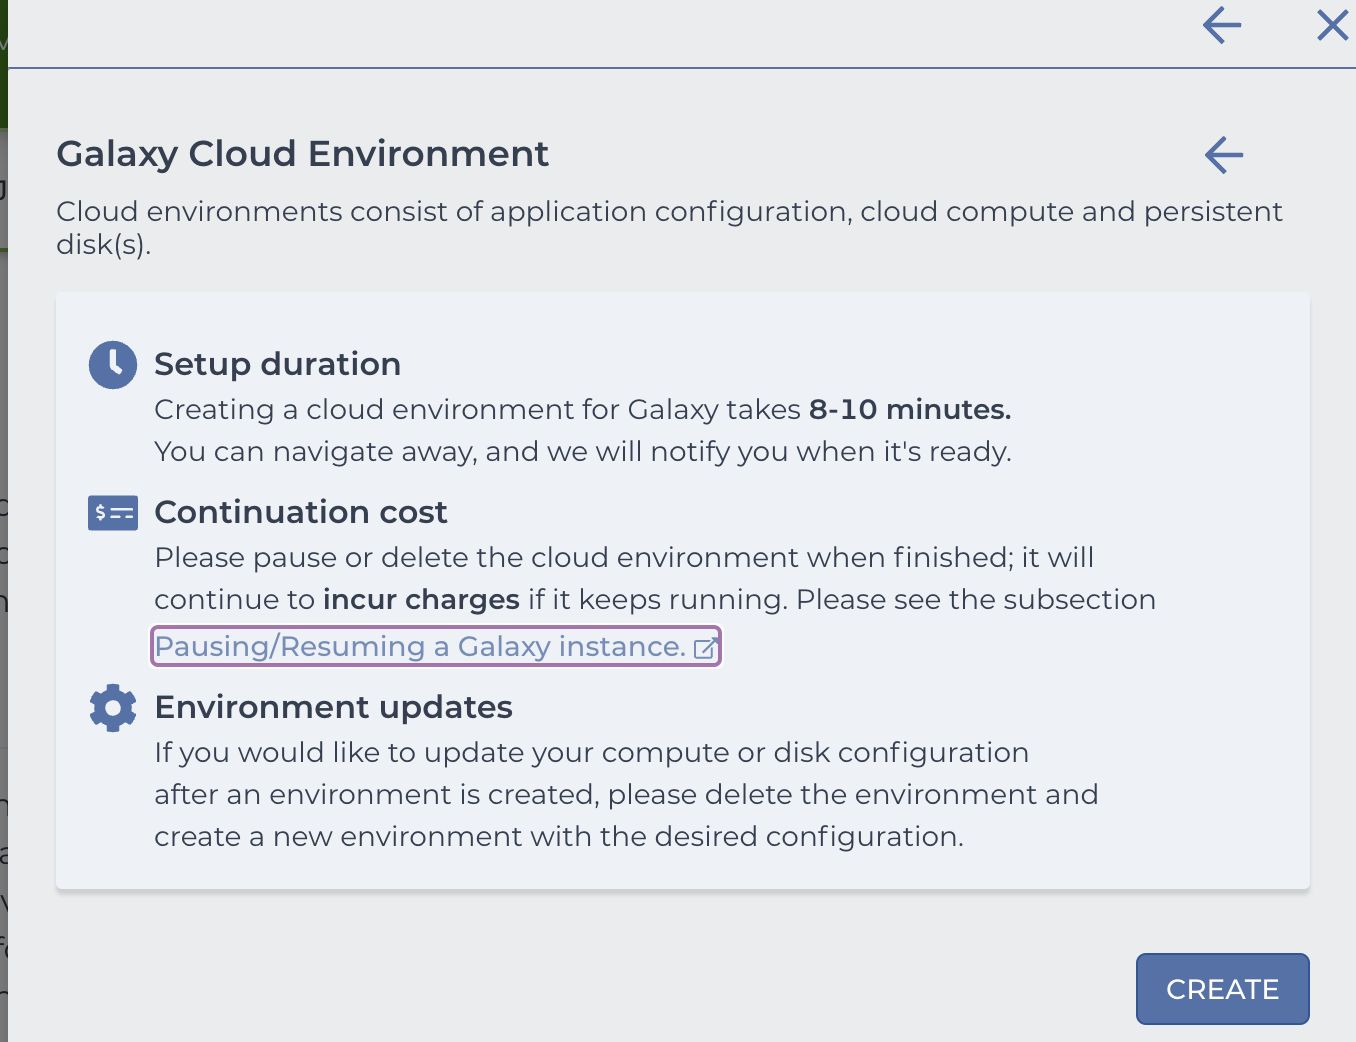 Screenshot of Galaxy Cloud Environment startup screen with warnings for Setup duration - Creating a cloud environment for Galaxy takes 8-10 minutes. You can navigate away, and we will notify you when it's ready - and Continuation cost - Please pause or delete the cloud environment when finished; it will continue to incur charges if it keeps running. Please see the subsection Pausing/Resuming a Galaxy instance - plus Environment updates - If you would like to update your compute or disk configuration
after an environment is created, please delete the environment and
create a new environment with the desired configuration.